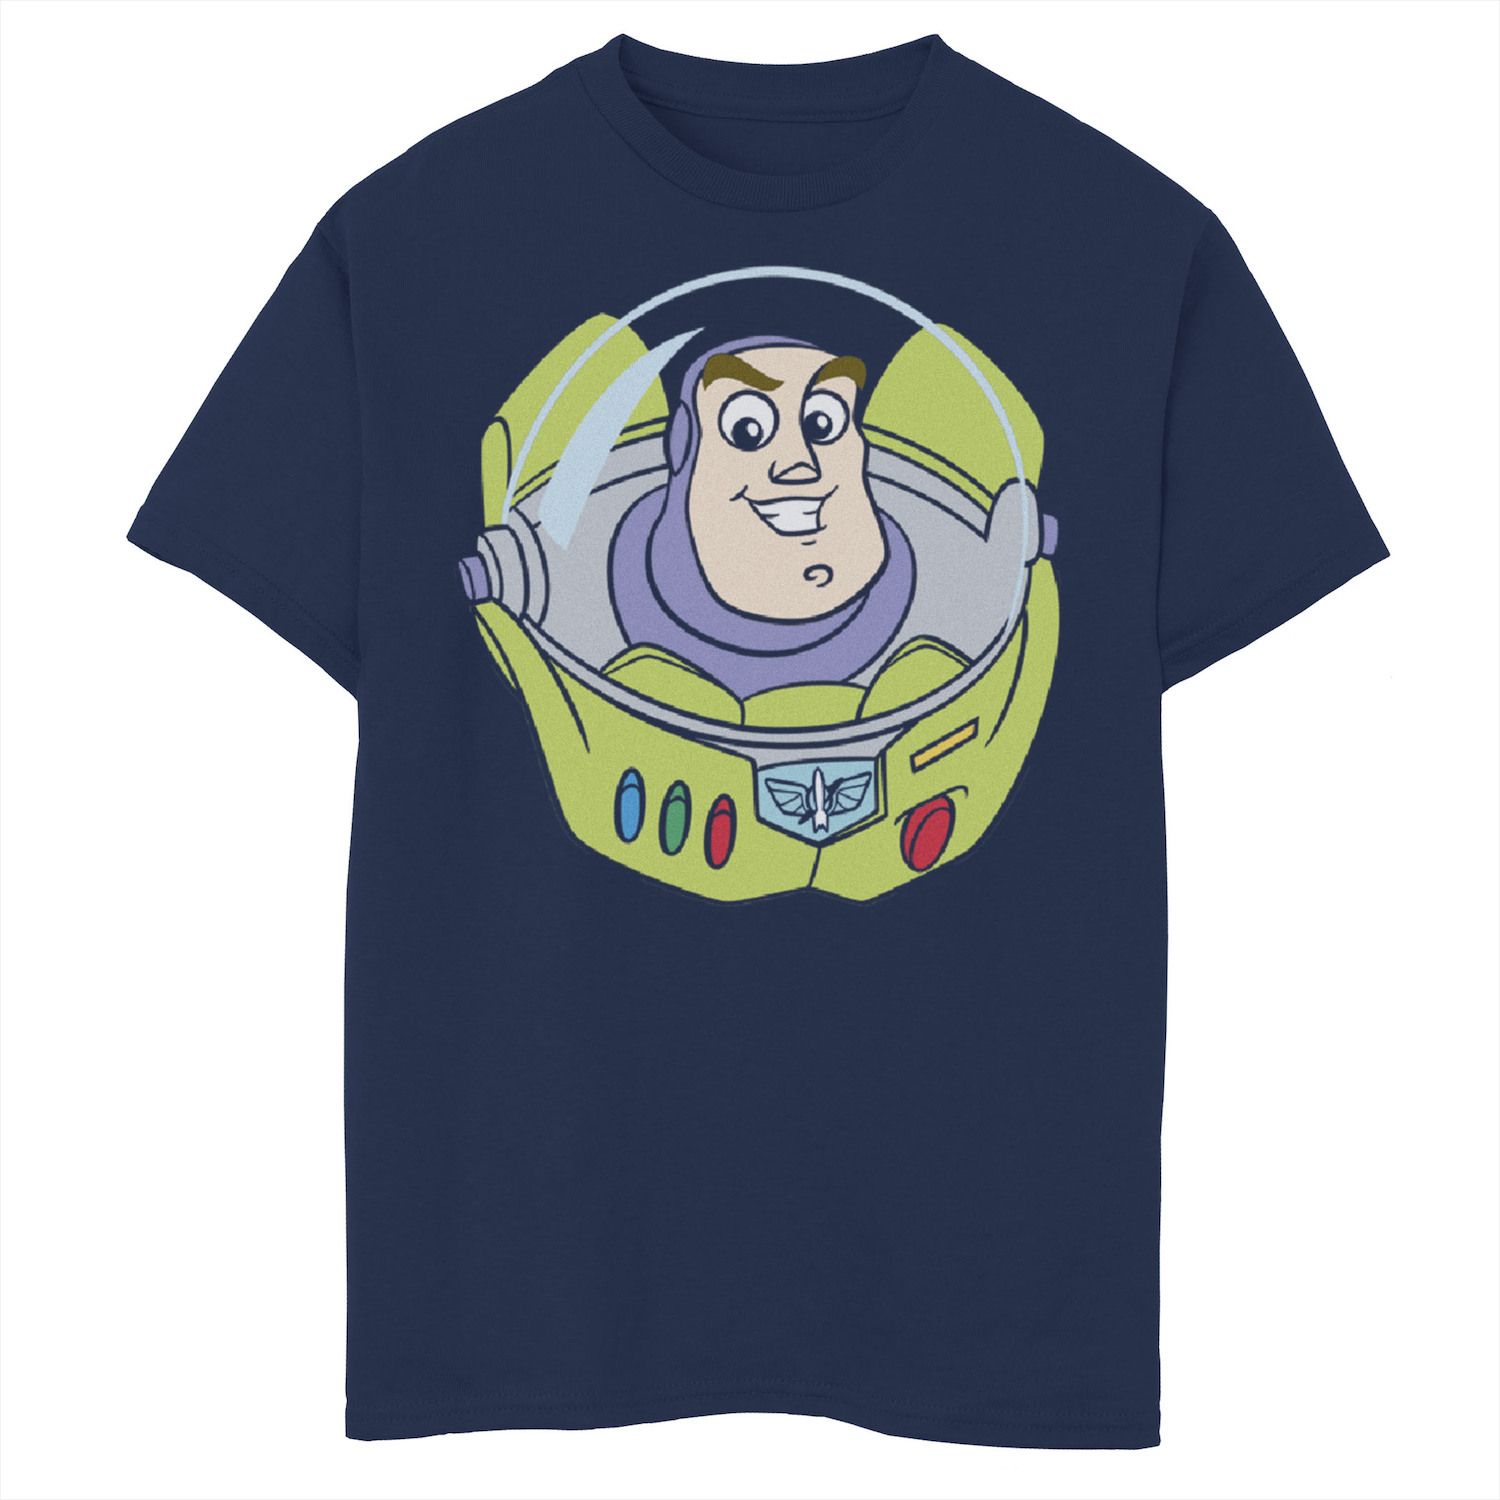 Image for Disney / Pixar Toy Story Boys 8-20 Buzz Lightyear Big Face Graphic Tee at Kohl's.